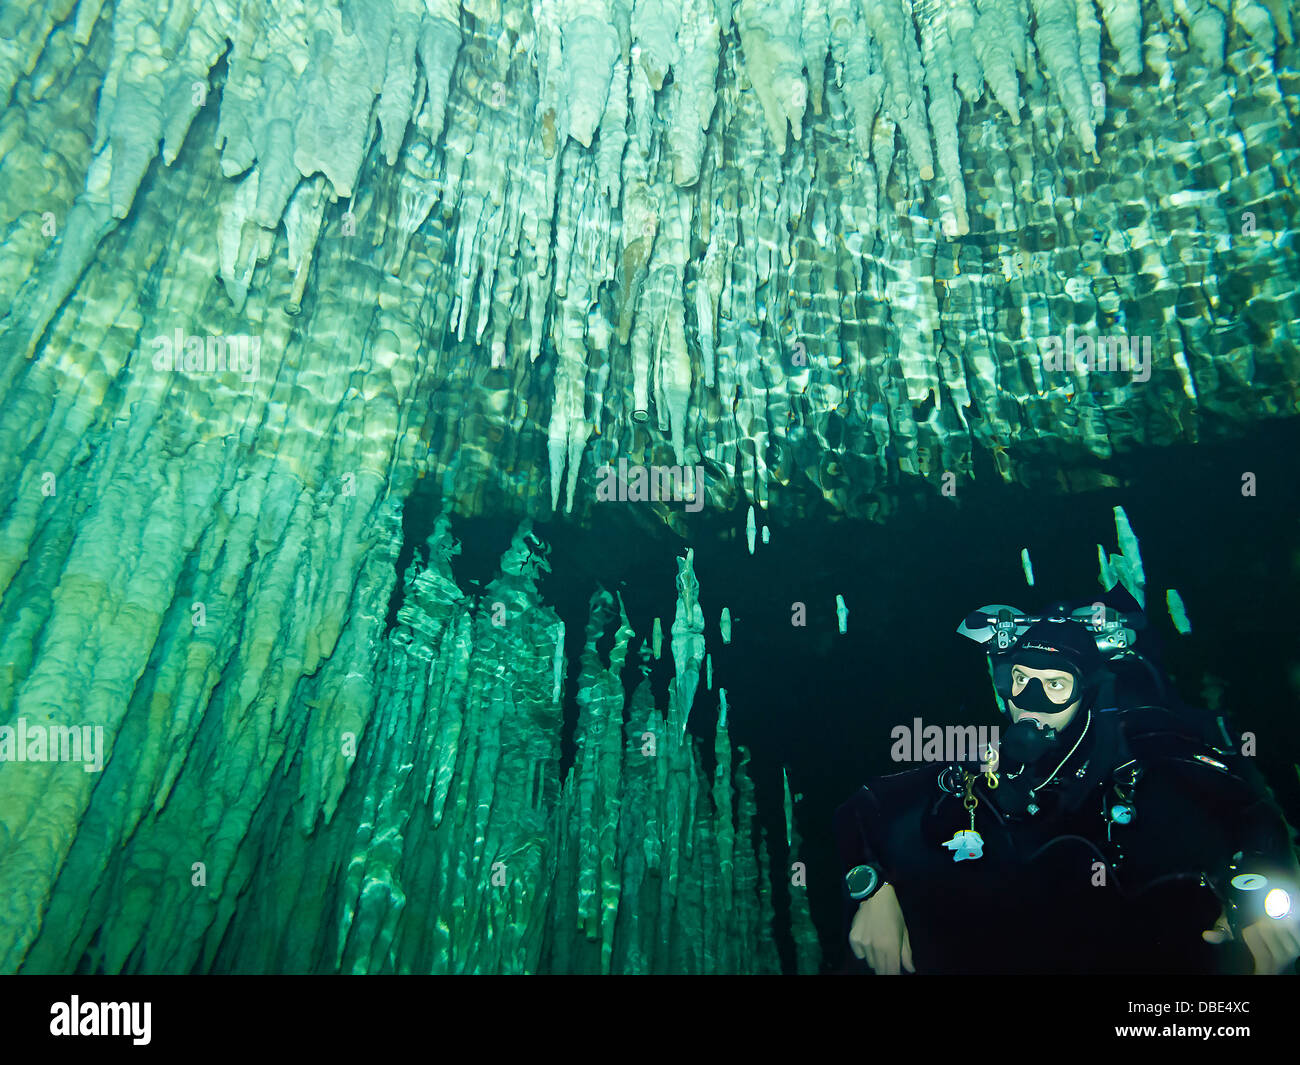 Diver with stalactite spikes hanging from ceiling of Dream Gate, one of the many cenotes people scuba dive in Yucatan, Mexico Stock Photo